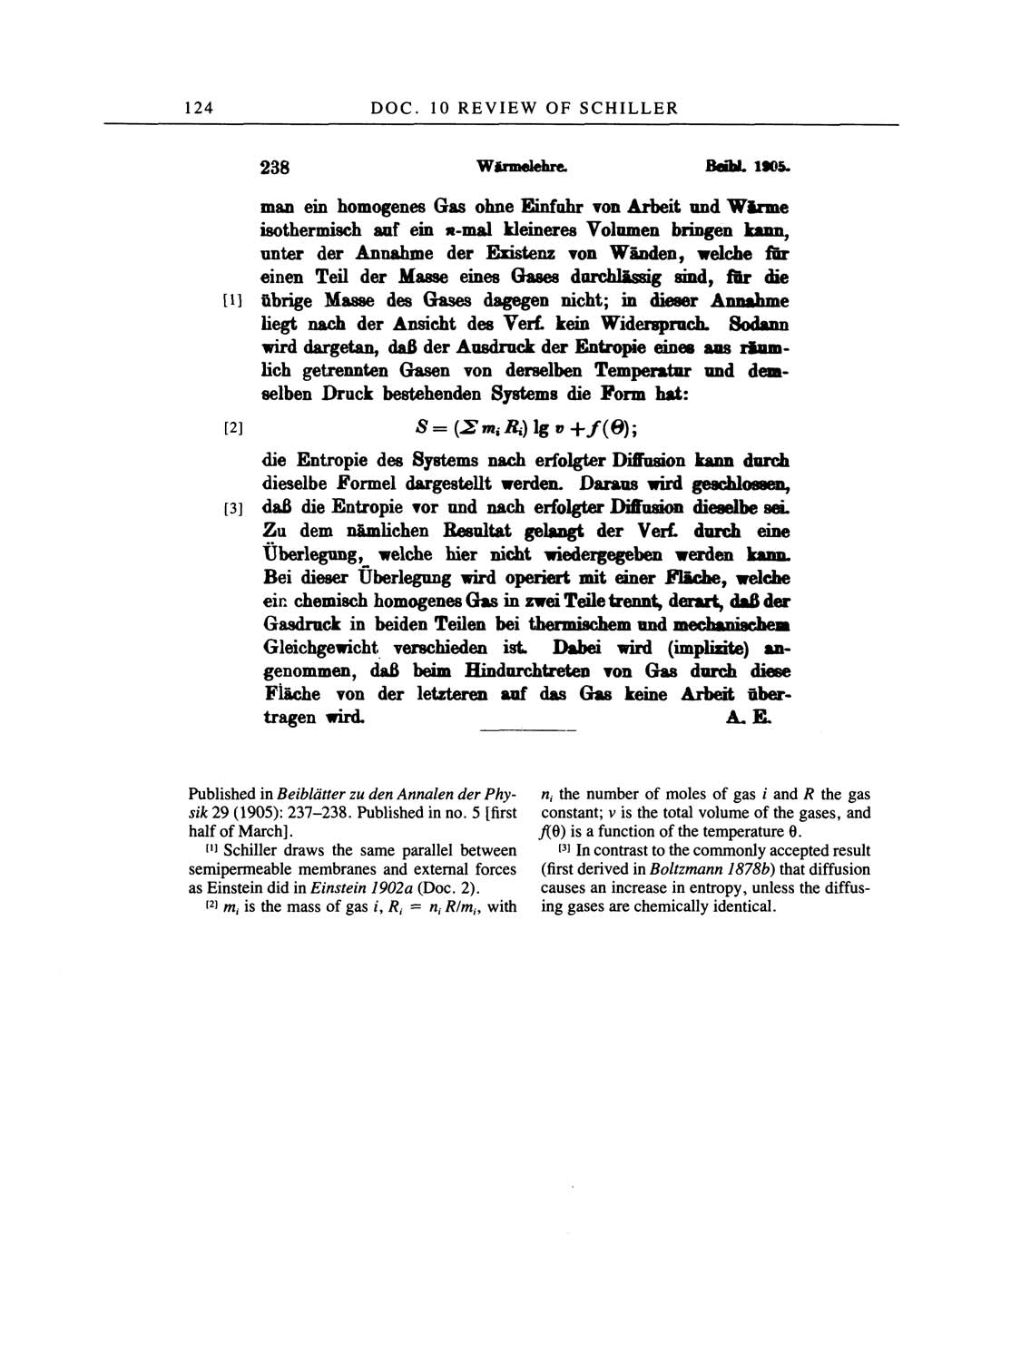 Volume 2: The Swiss Years: Writings, 1900-1909 page 124